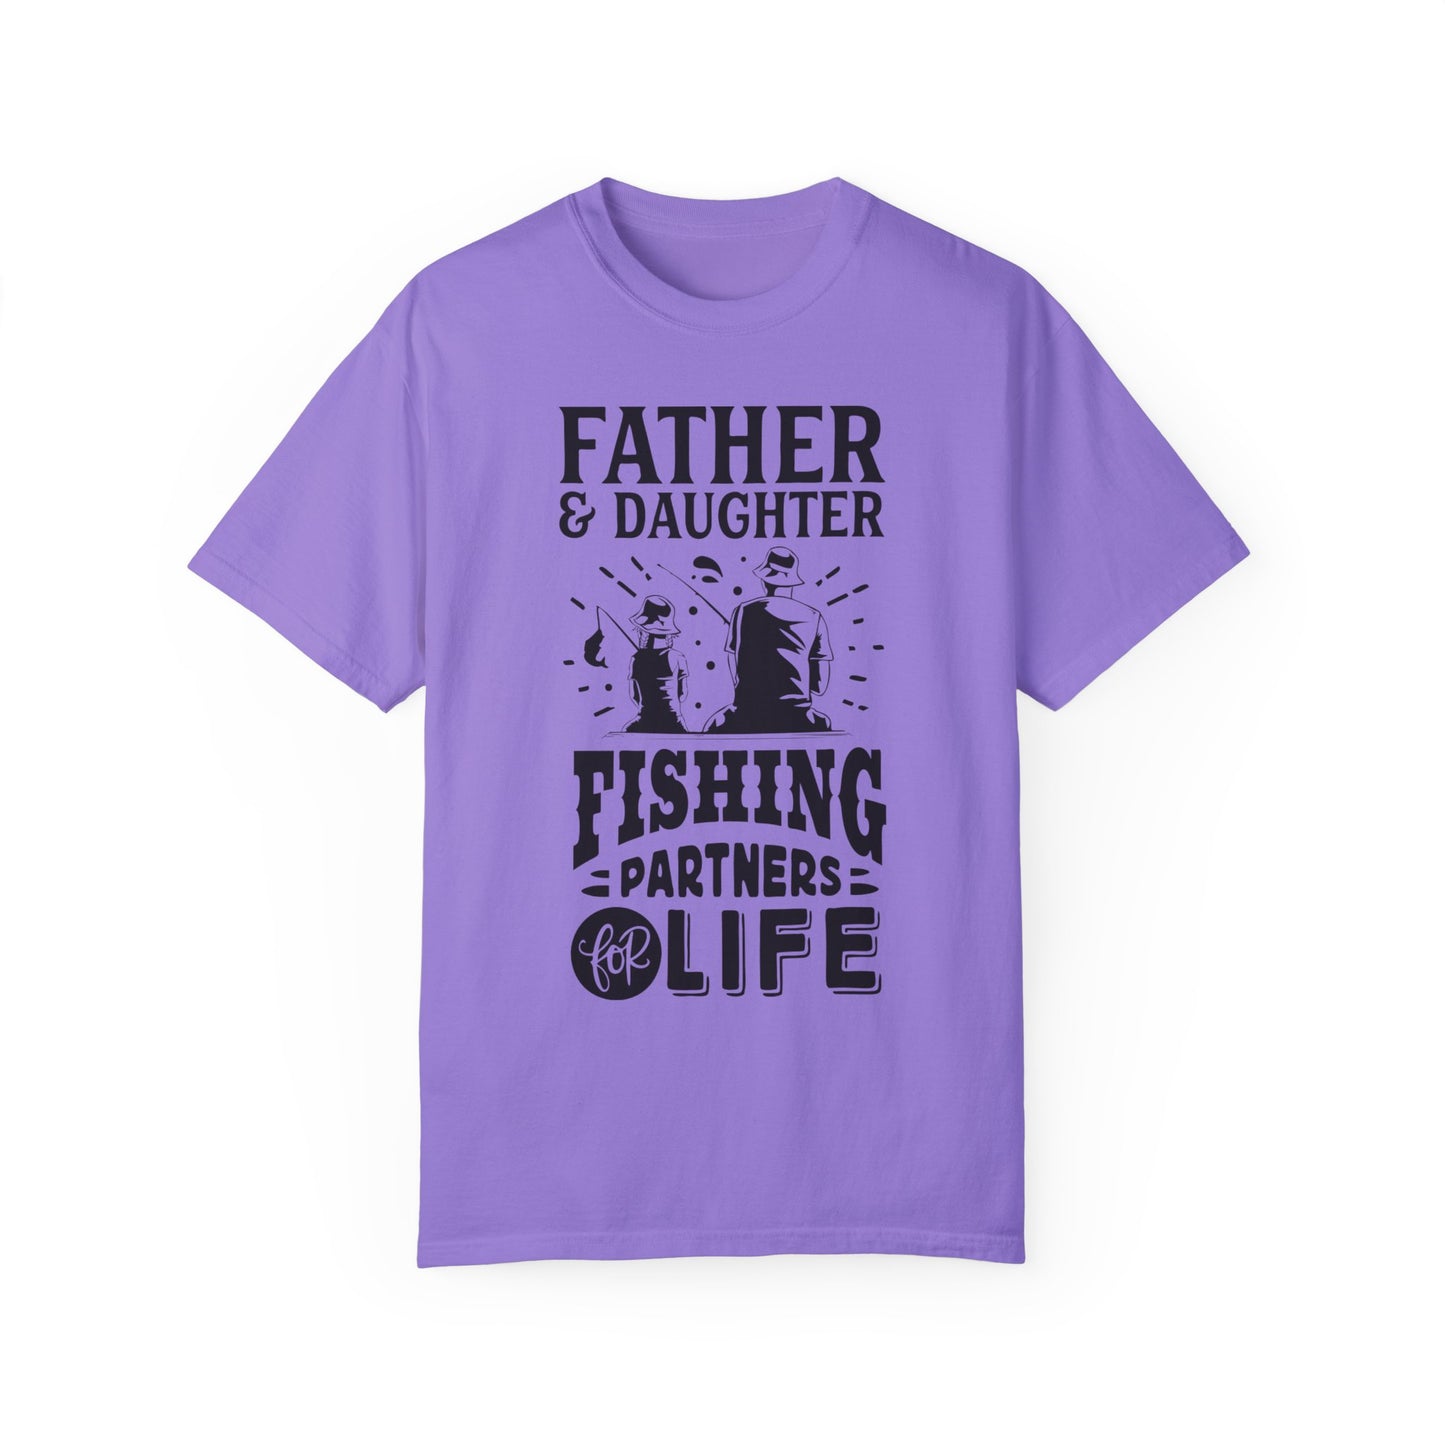 Father and daughter forever: Unisex Garment-Dyed T-shirt